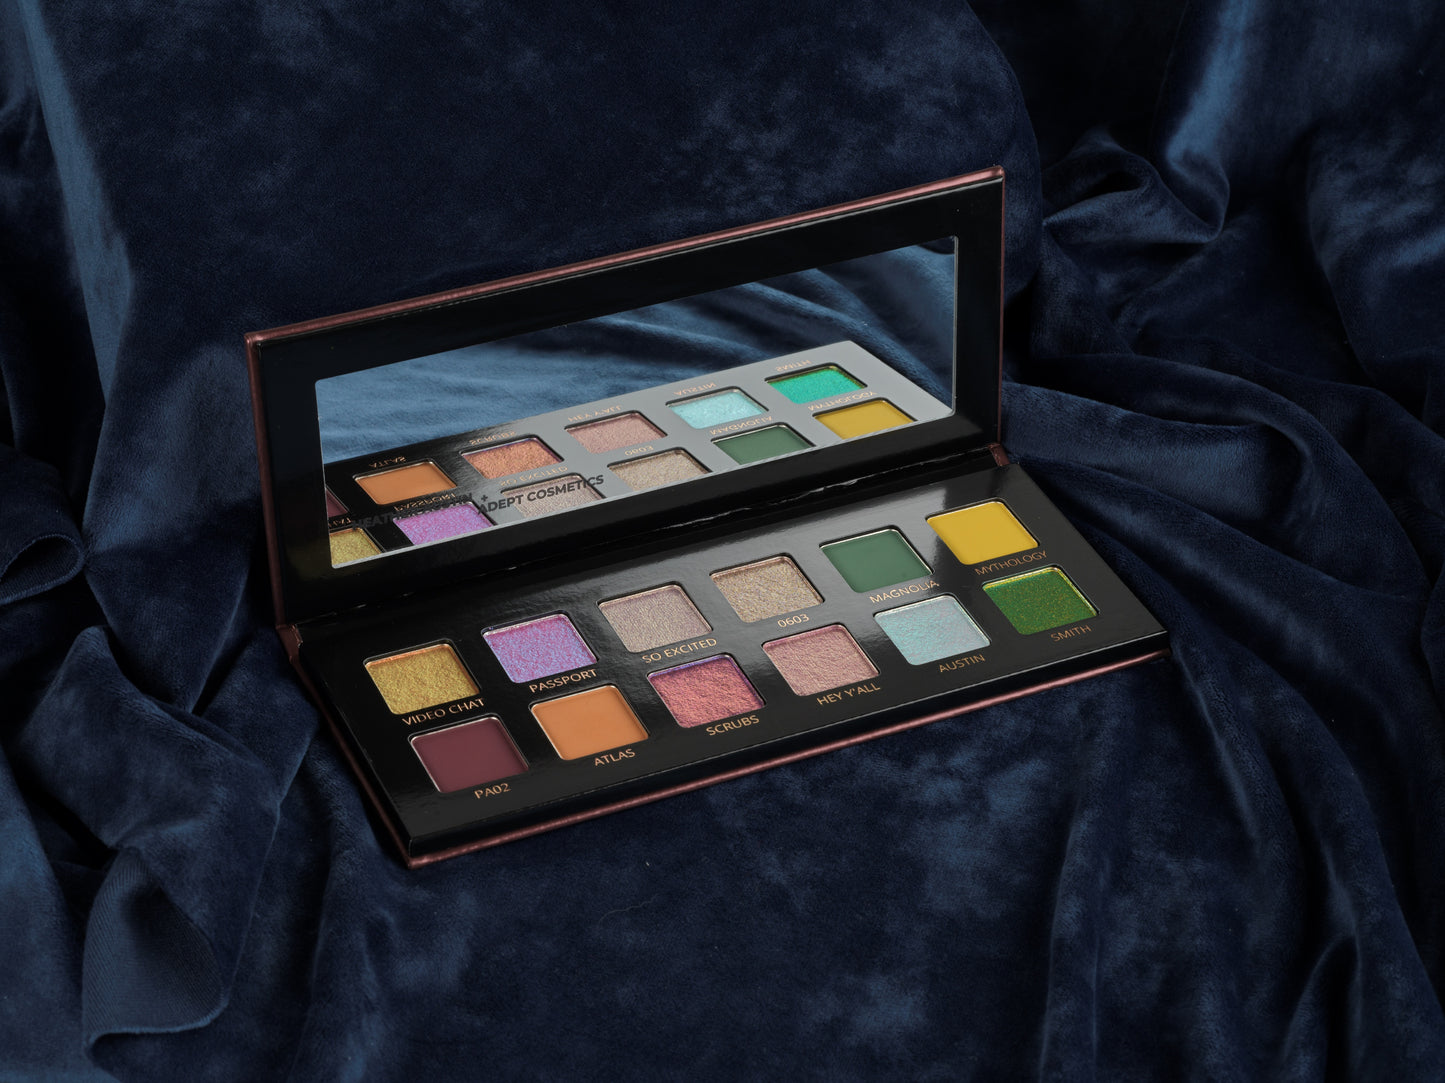 Heather Austin palette opened by Adept Cosmetics